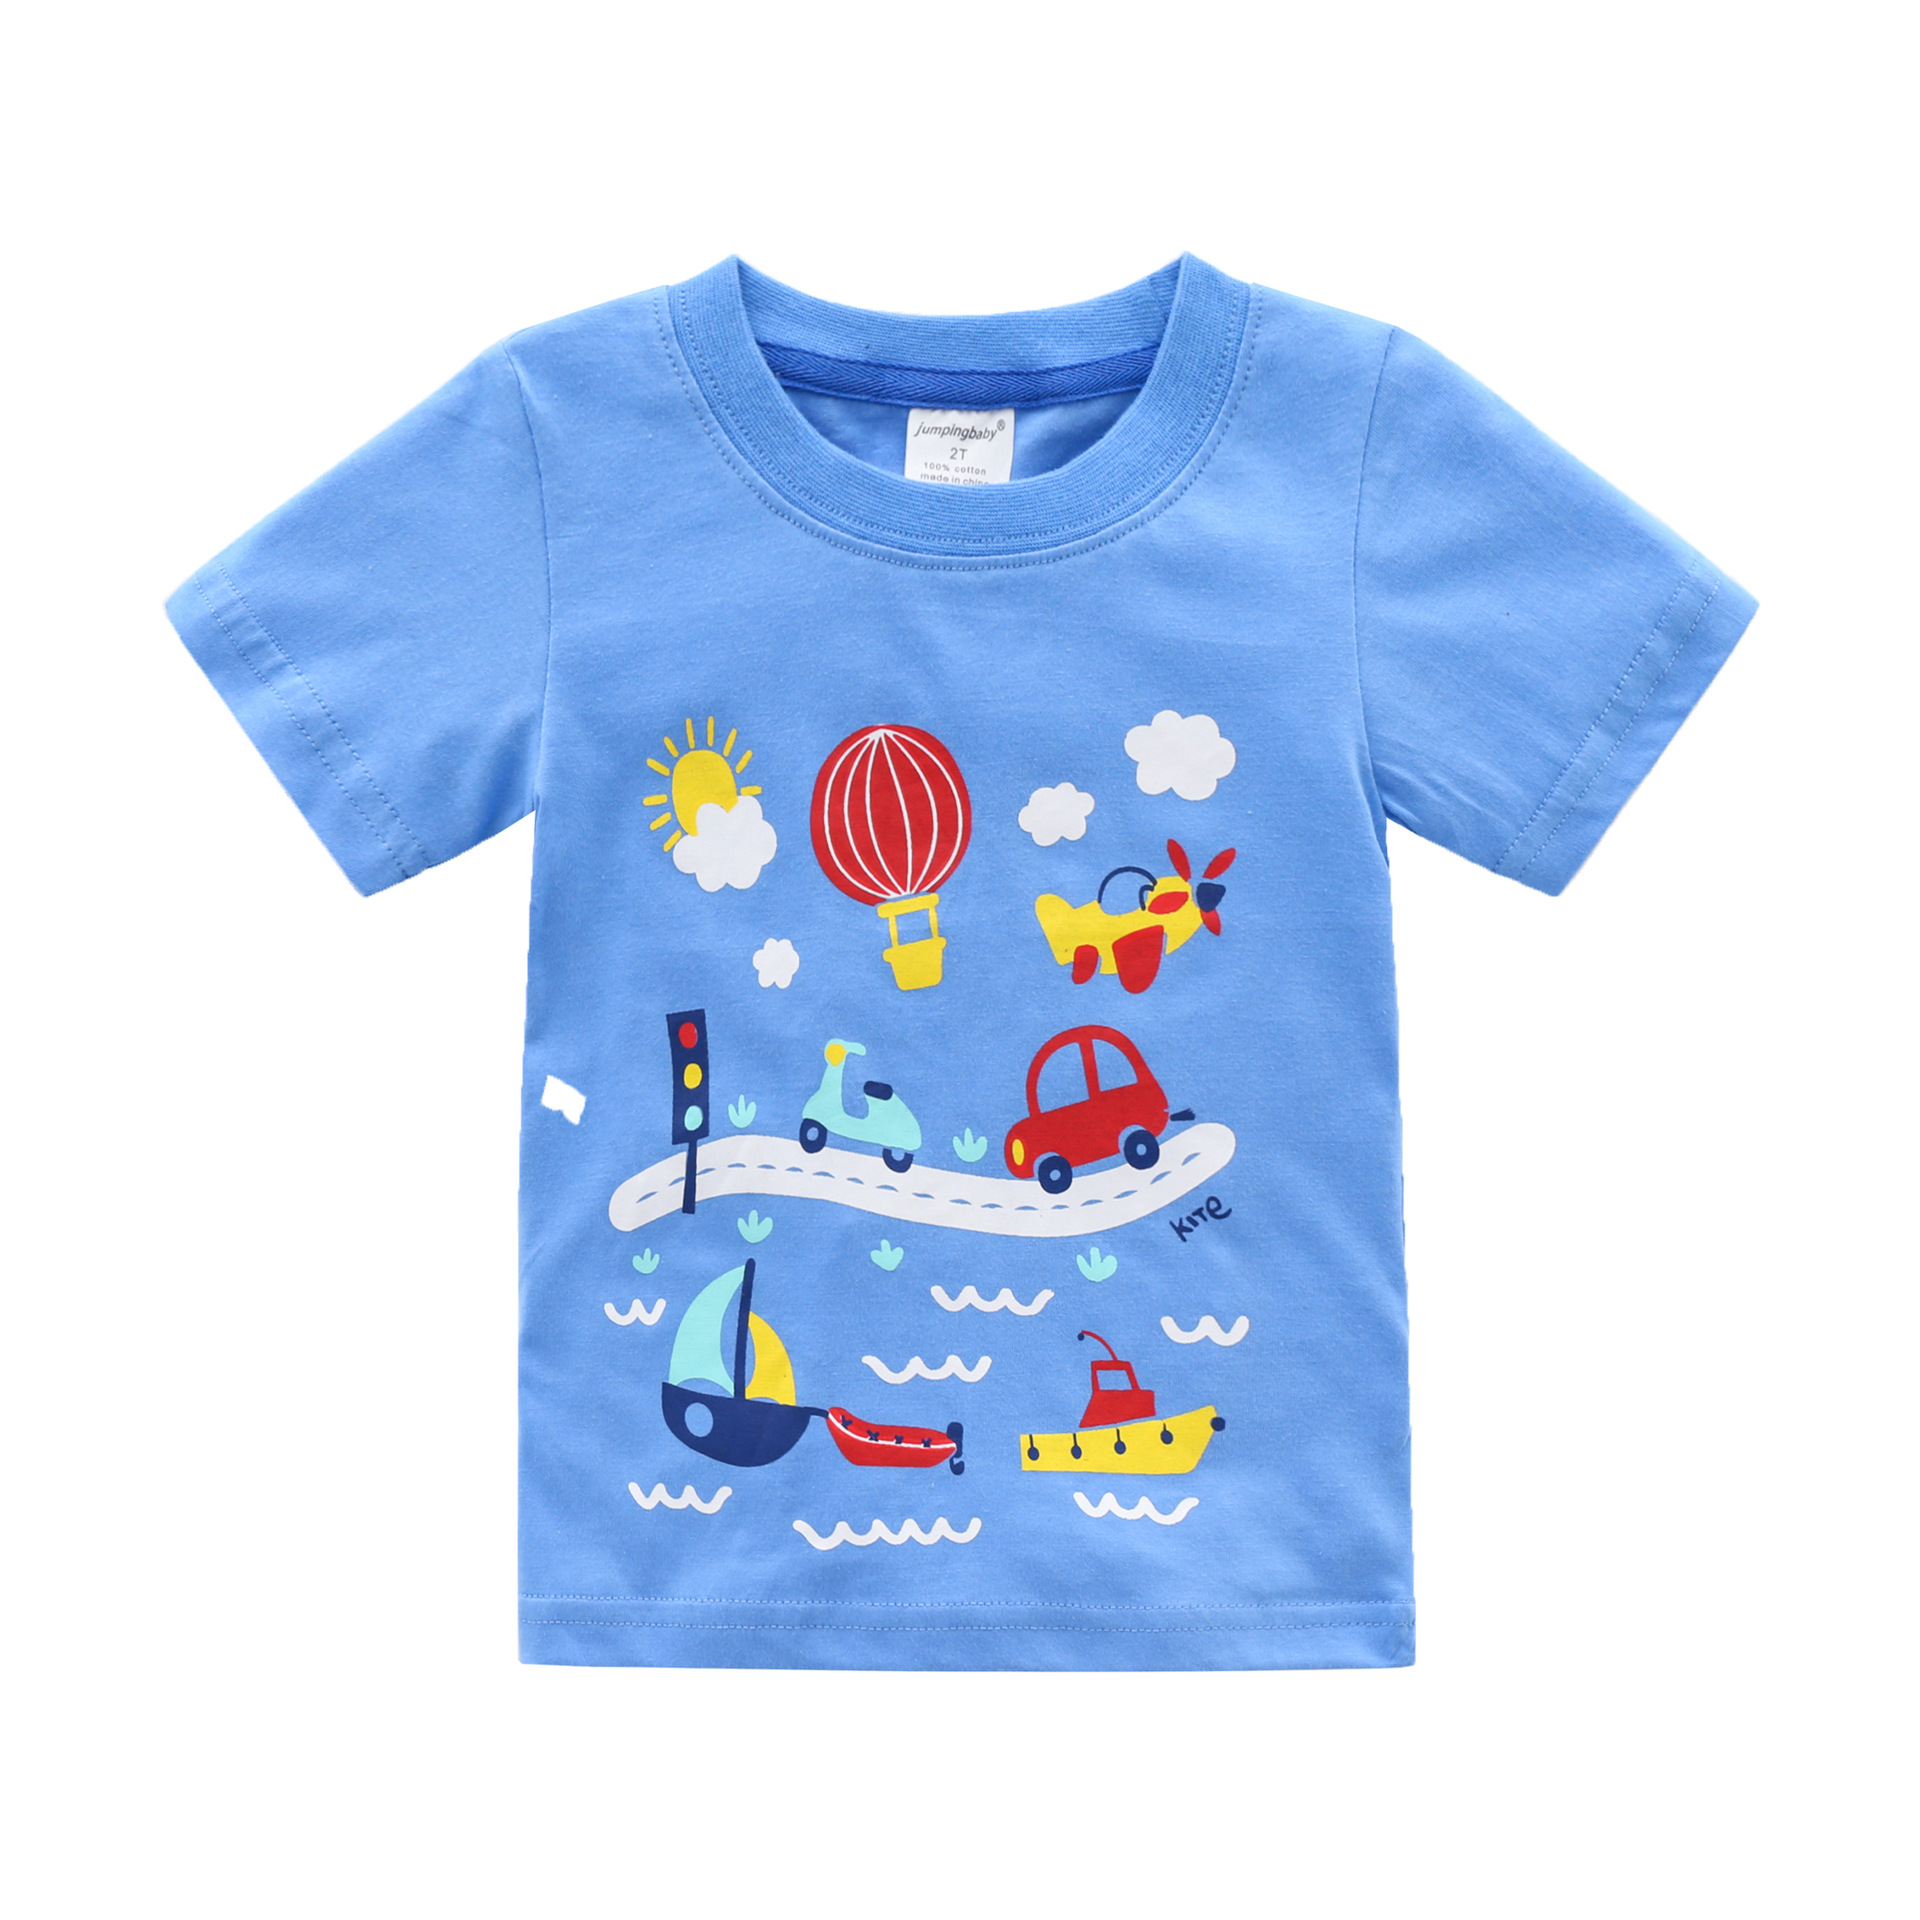 "Vibrant and stylish boys' T-shirts for playful outdoor activities."